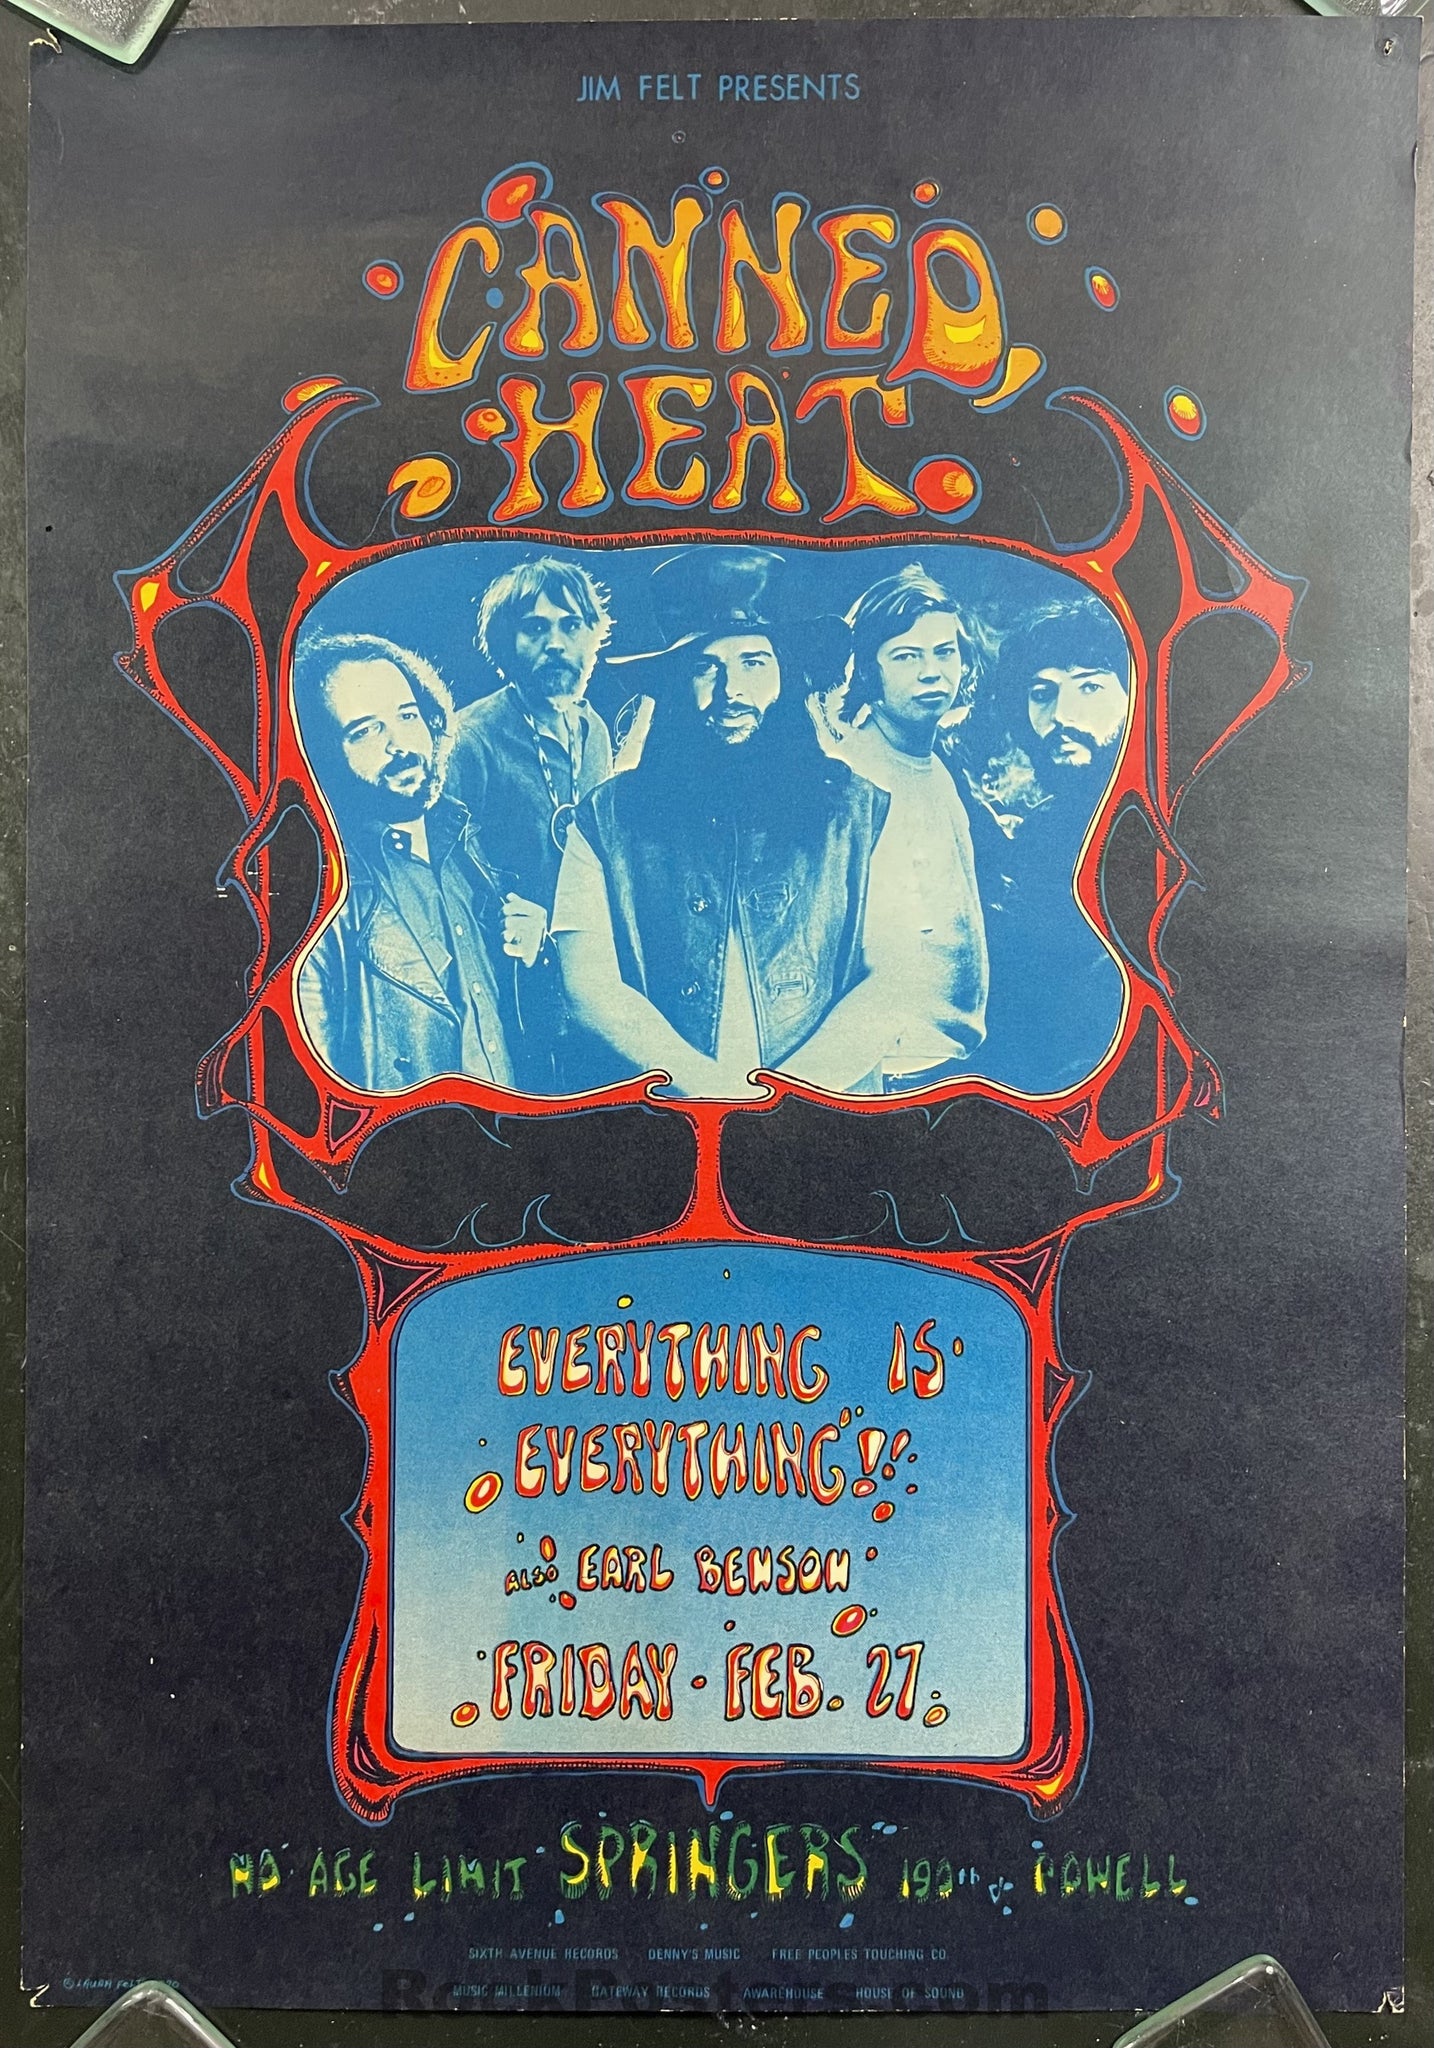 AUCTION - Canned Heat - 1970 Poster - Springer's Ballroom Portland, OR - Excellent